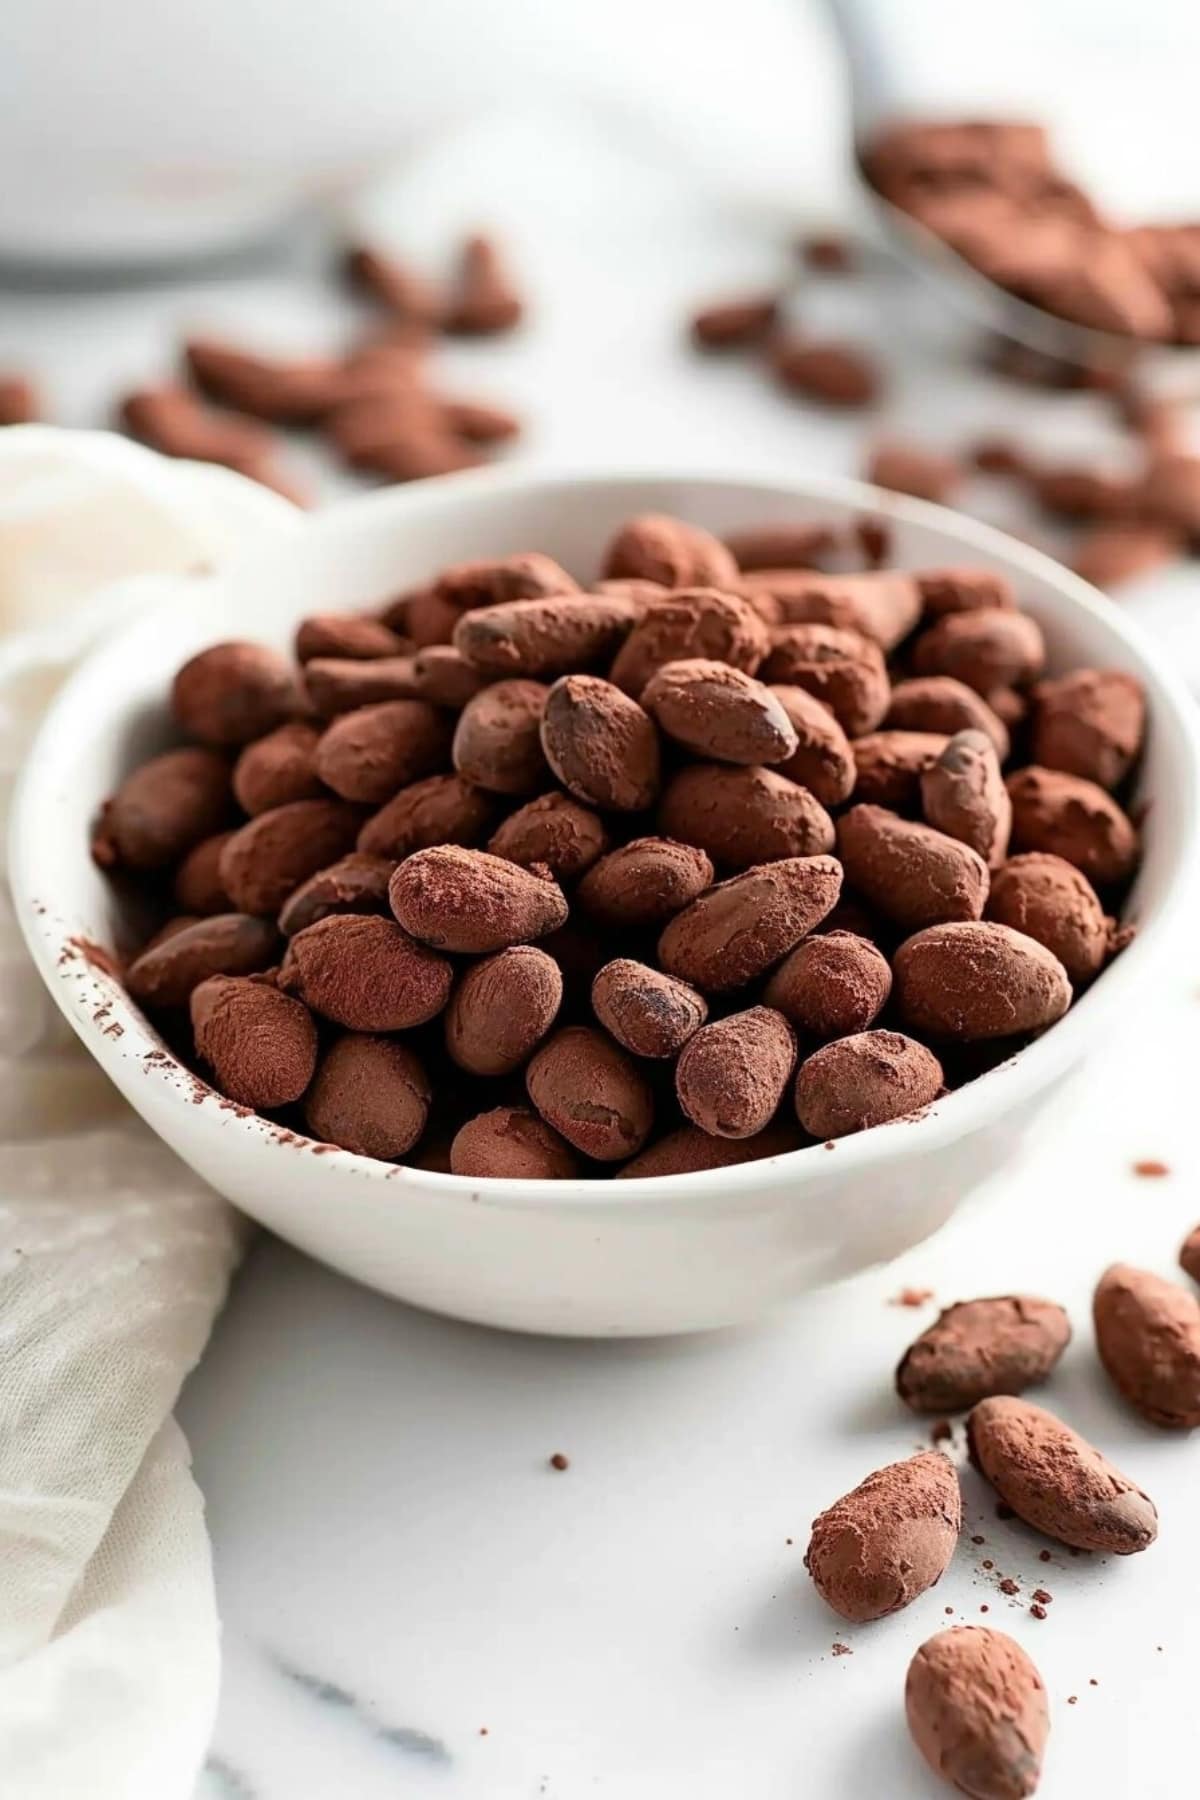 Bunch of chocolate and cocoa coated almonds in a white bowl.